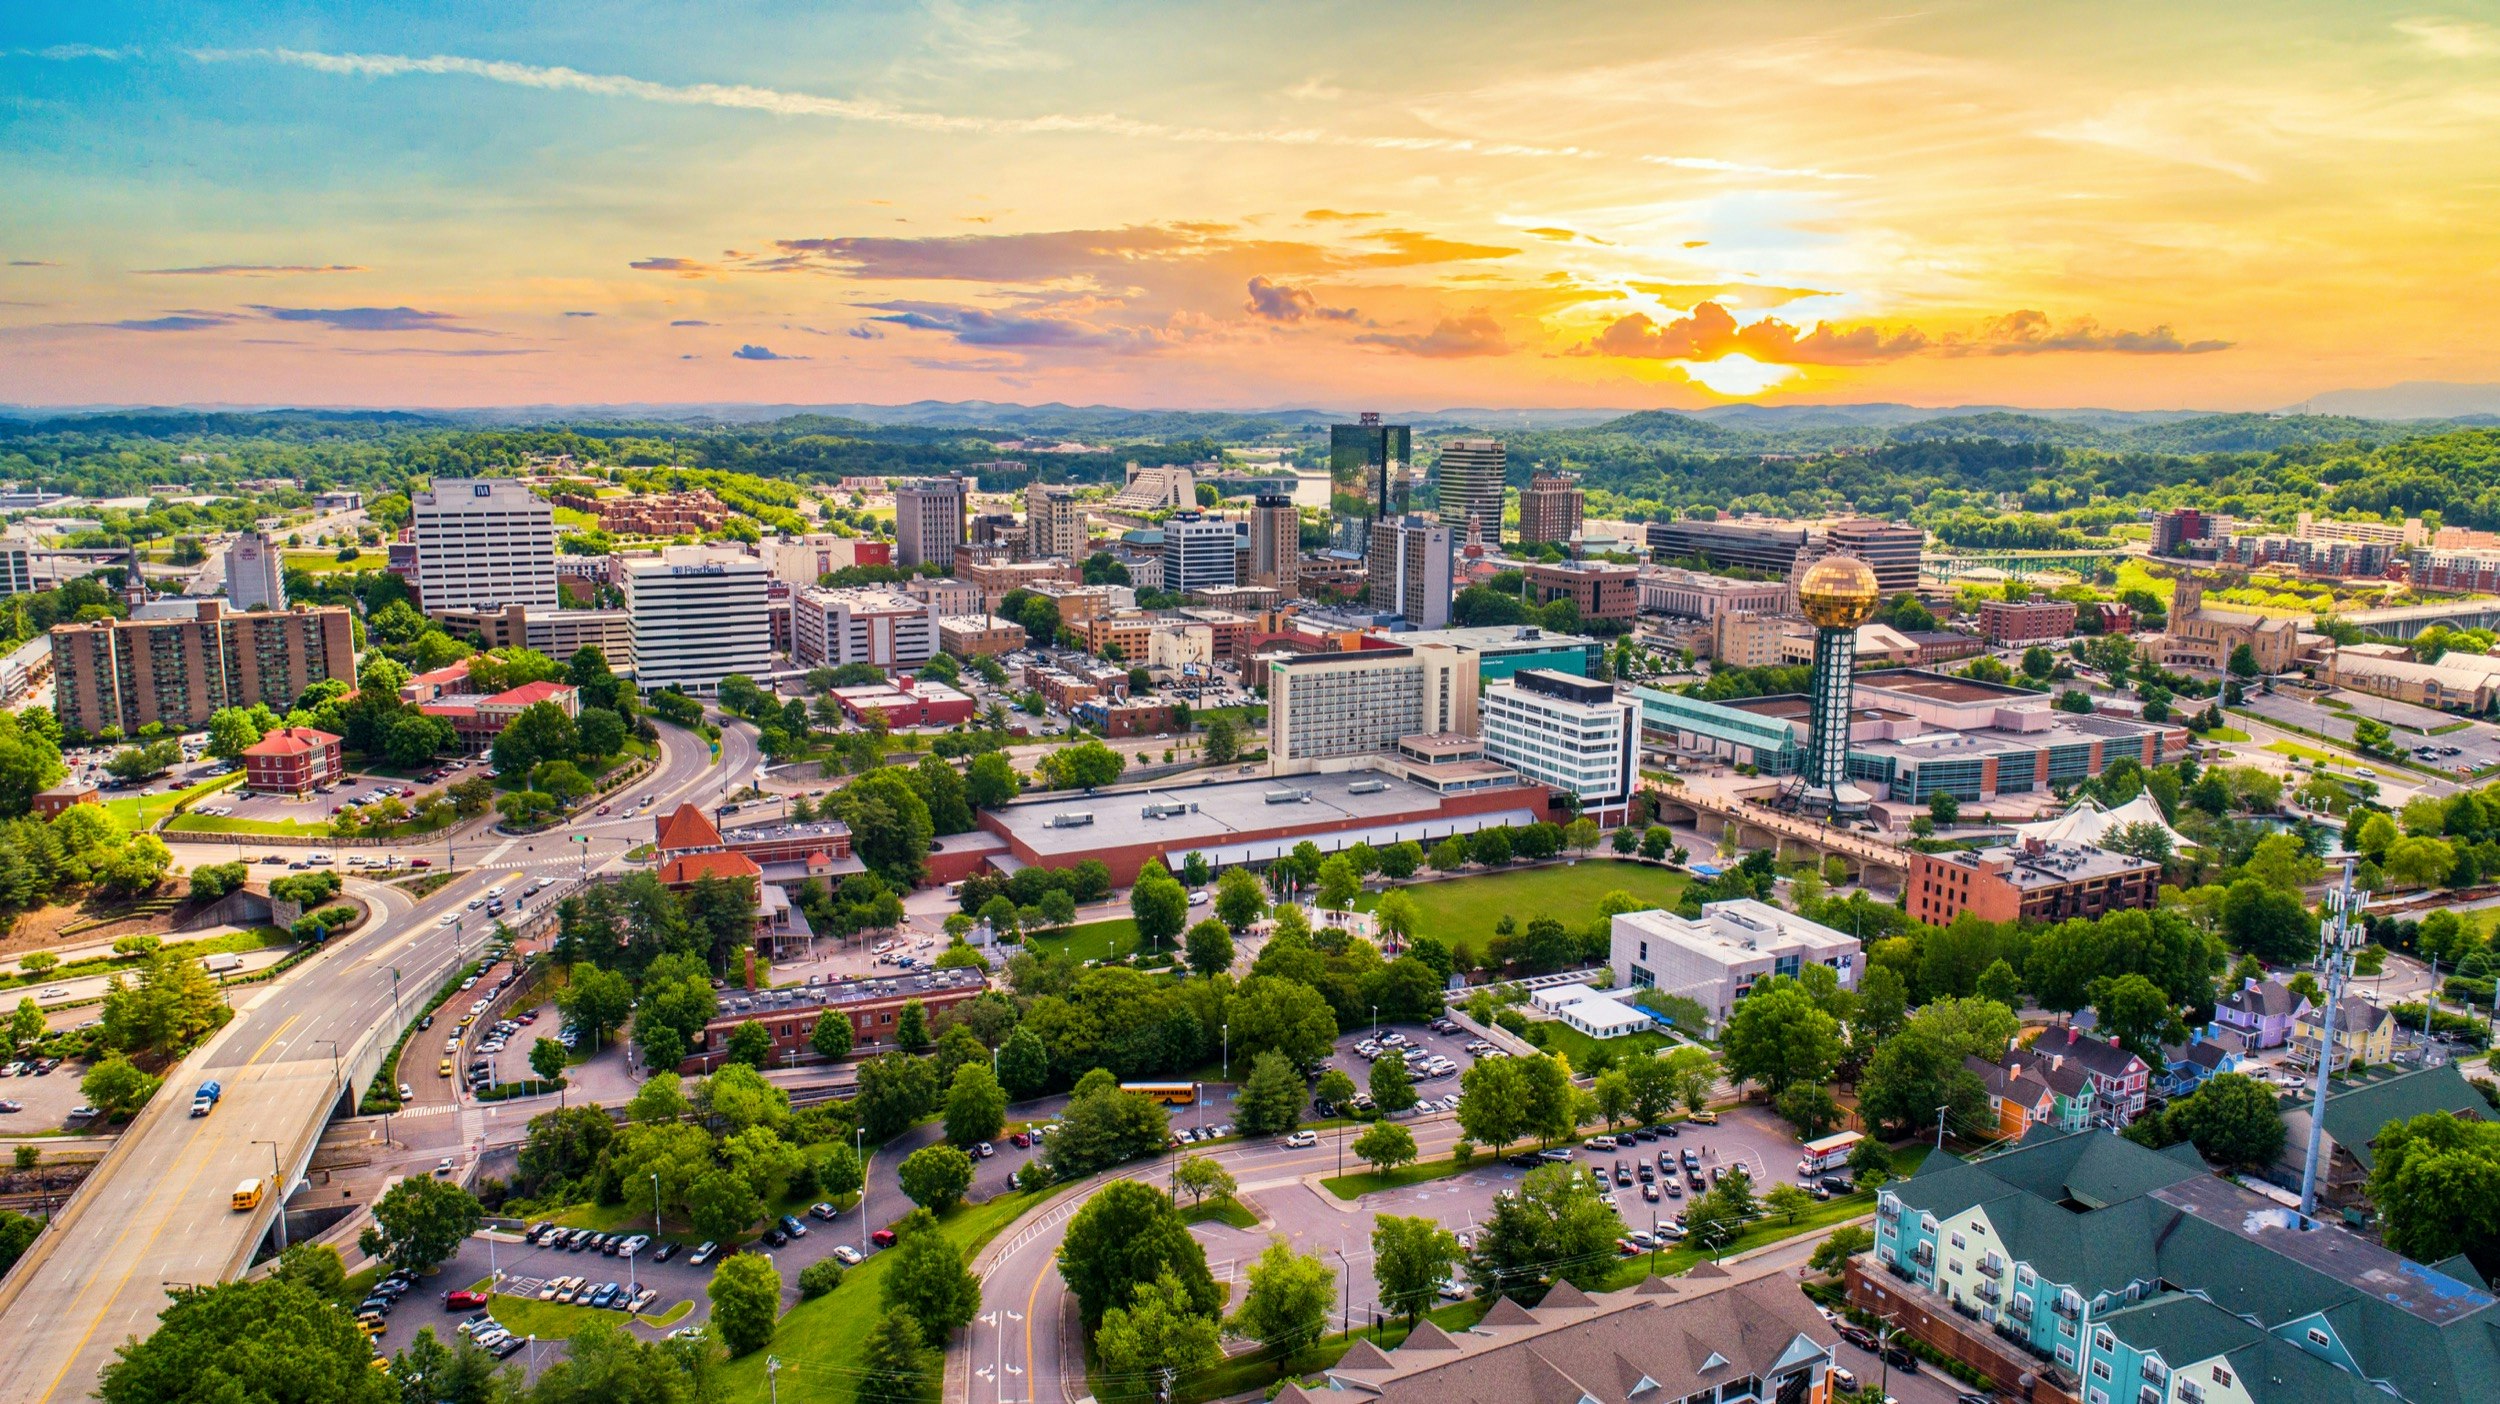 Knoxville_Responsible_City_View.jpg